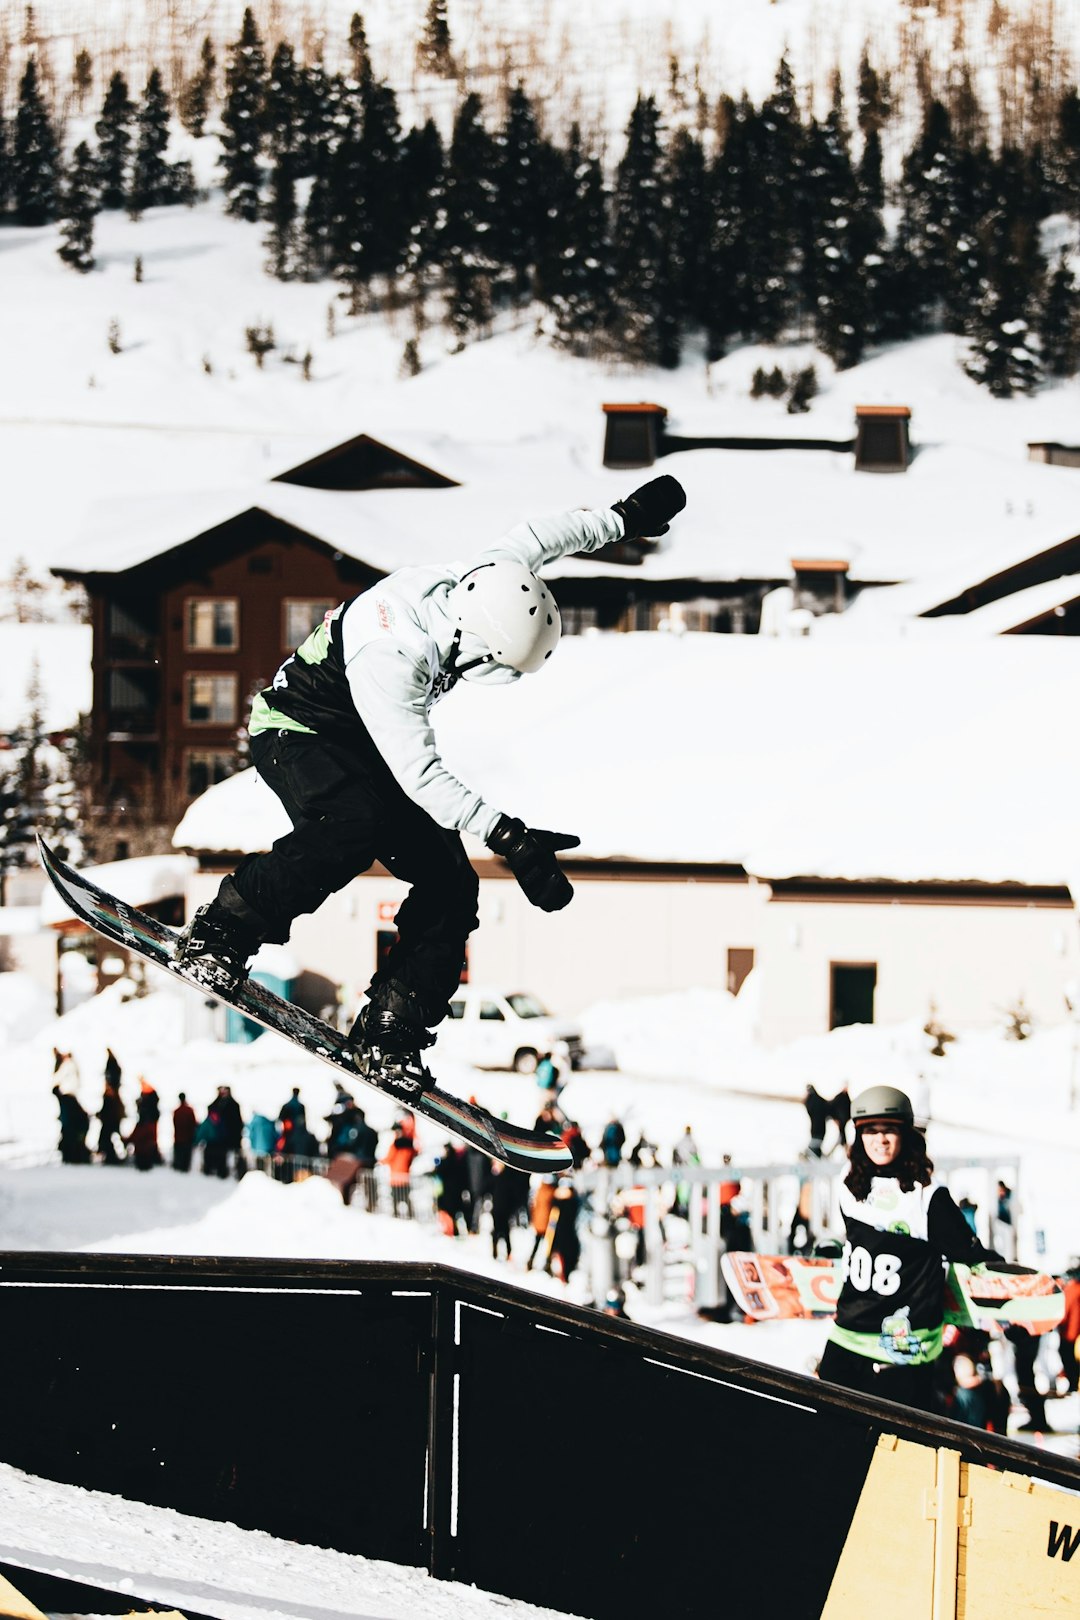 man in white jacket and black pants riding on black and white snowboard during daytime